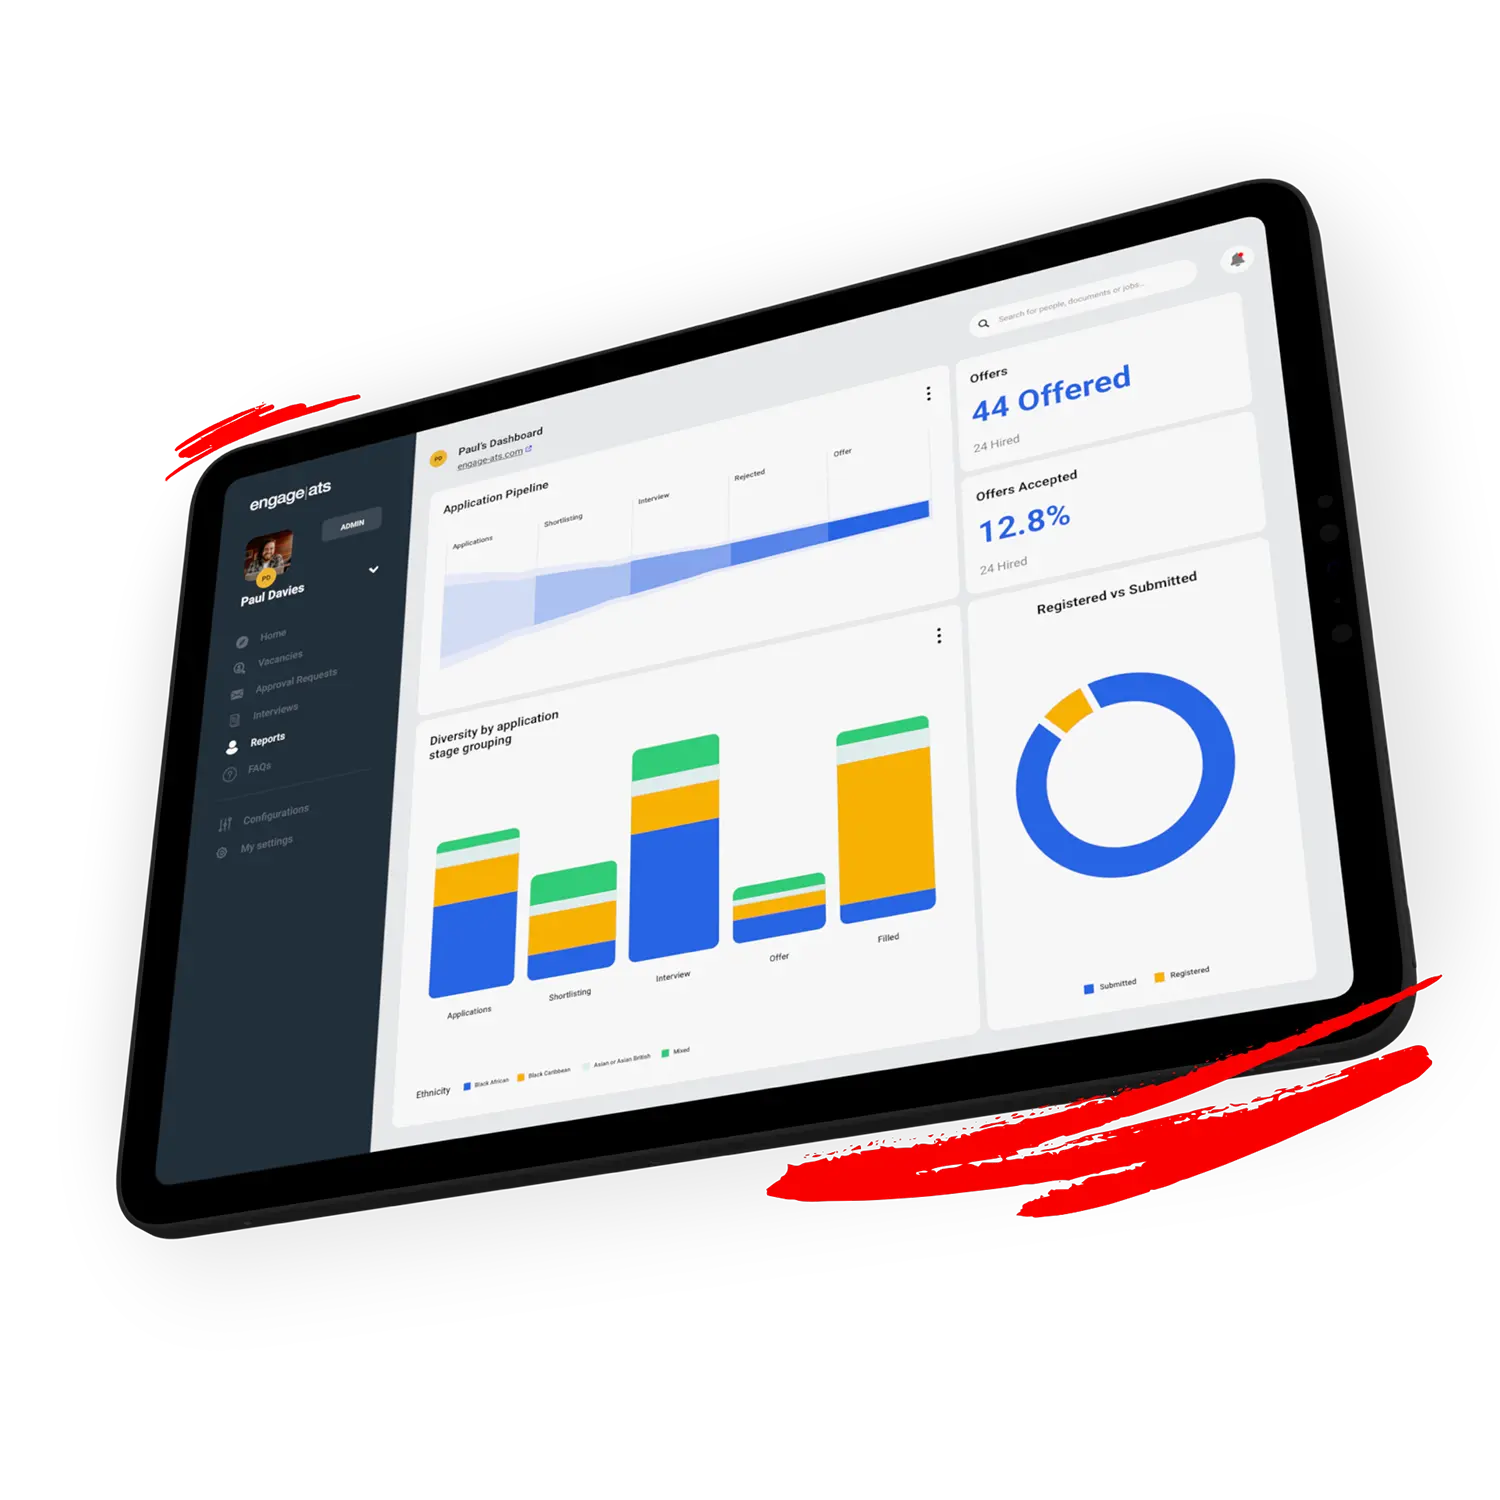 engage|ats dashboard in a tablet